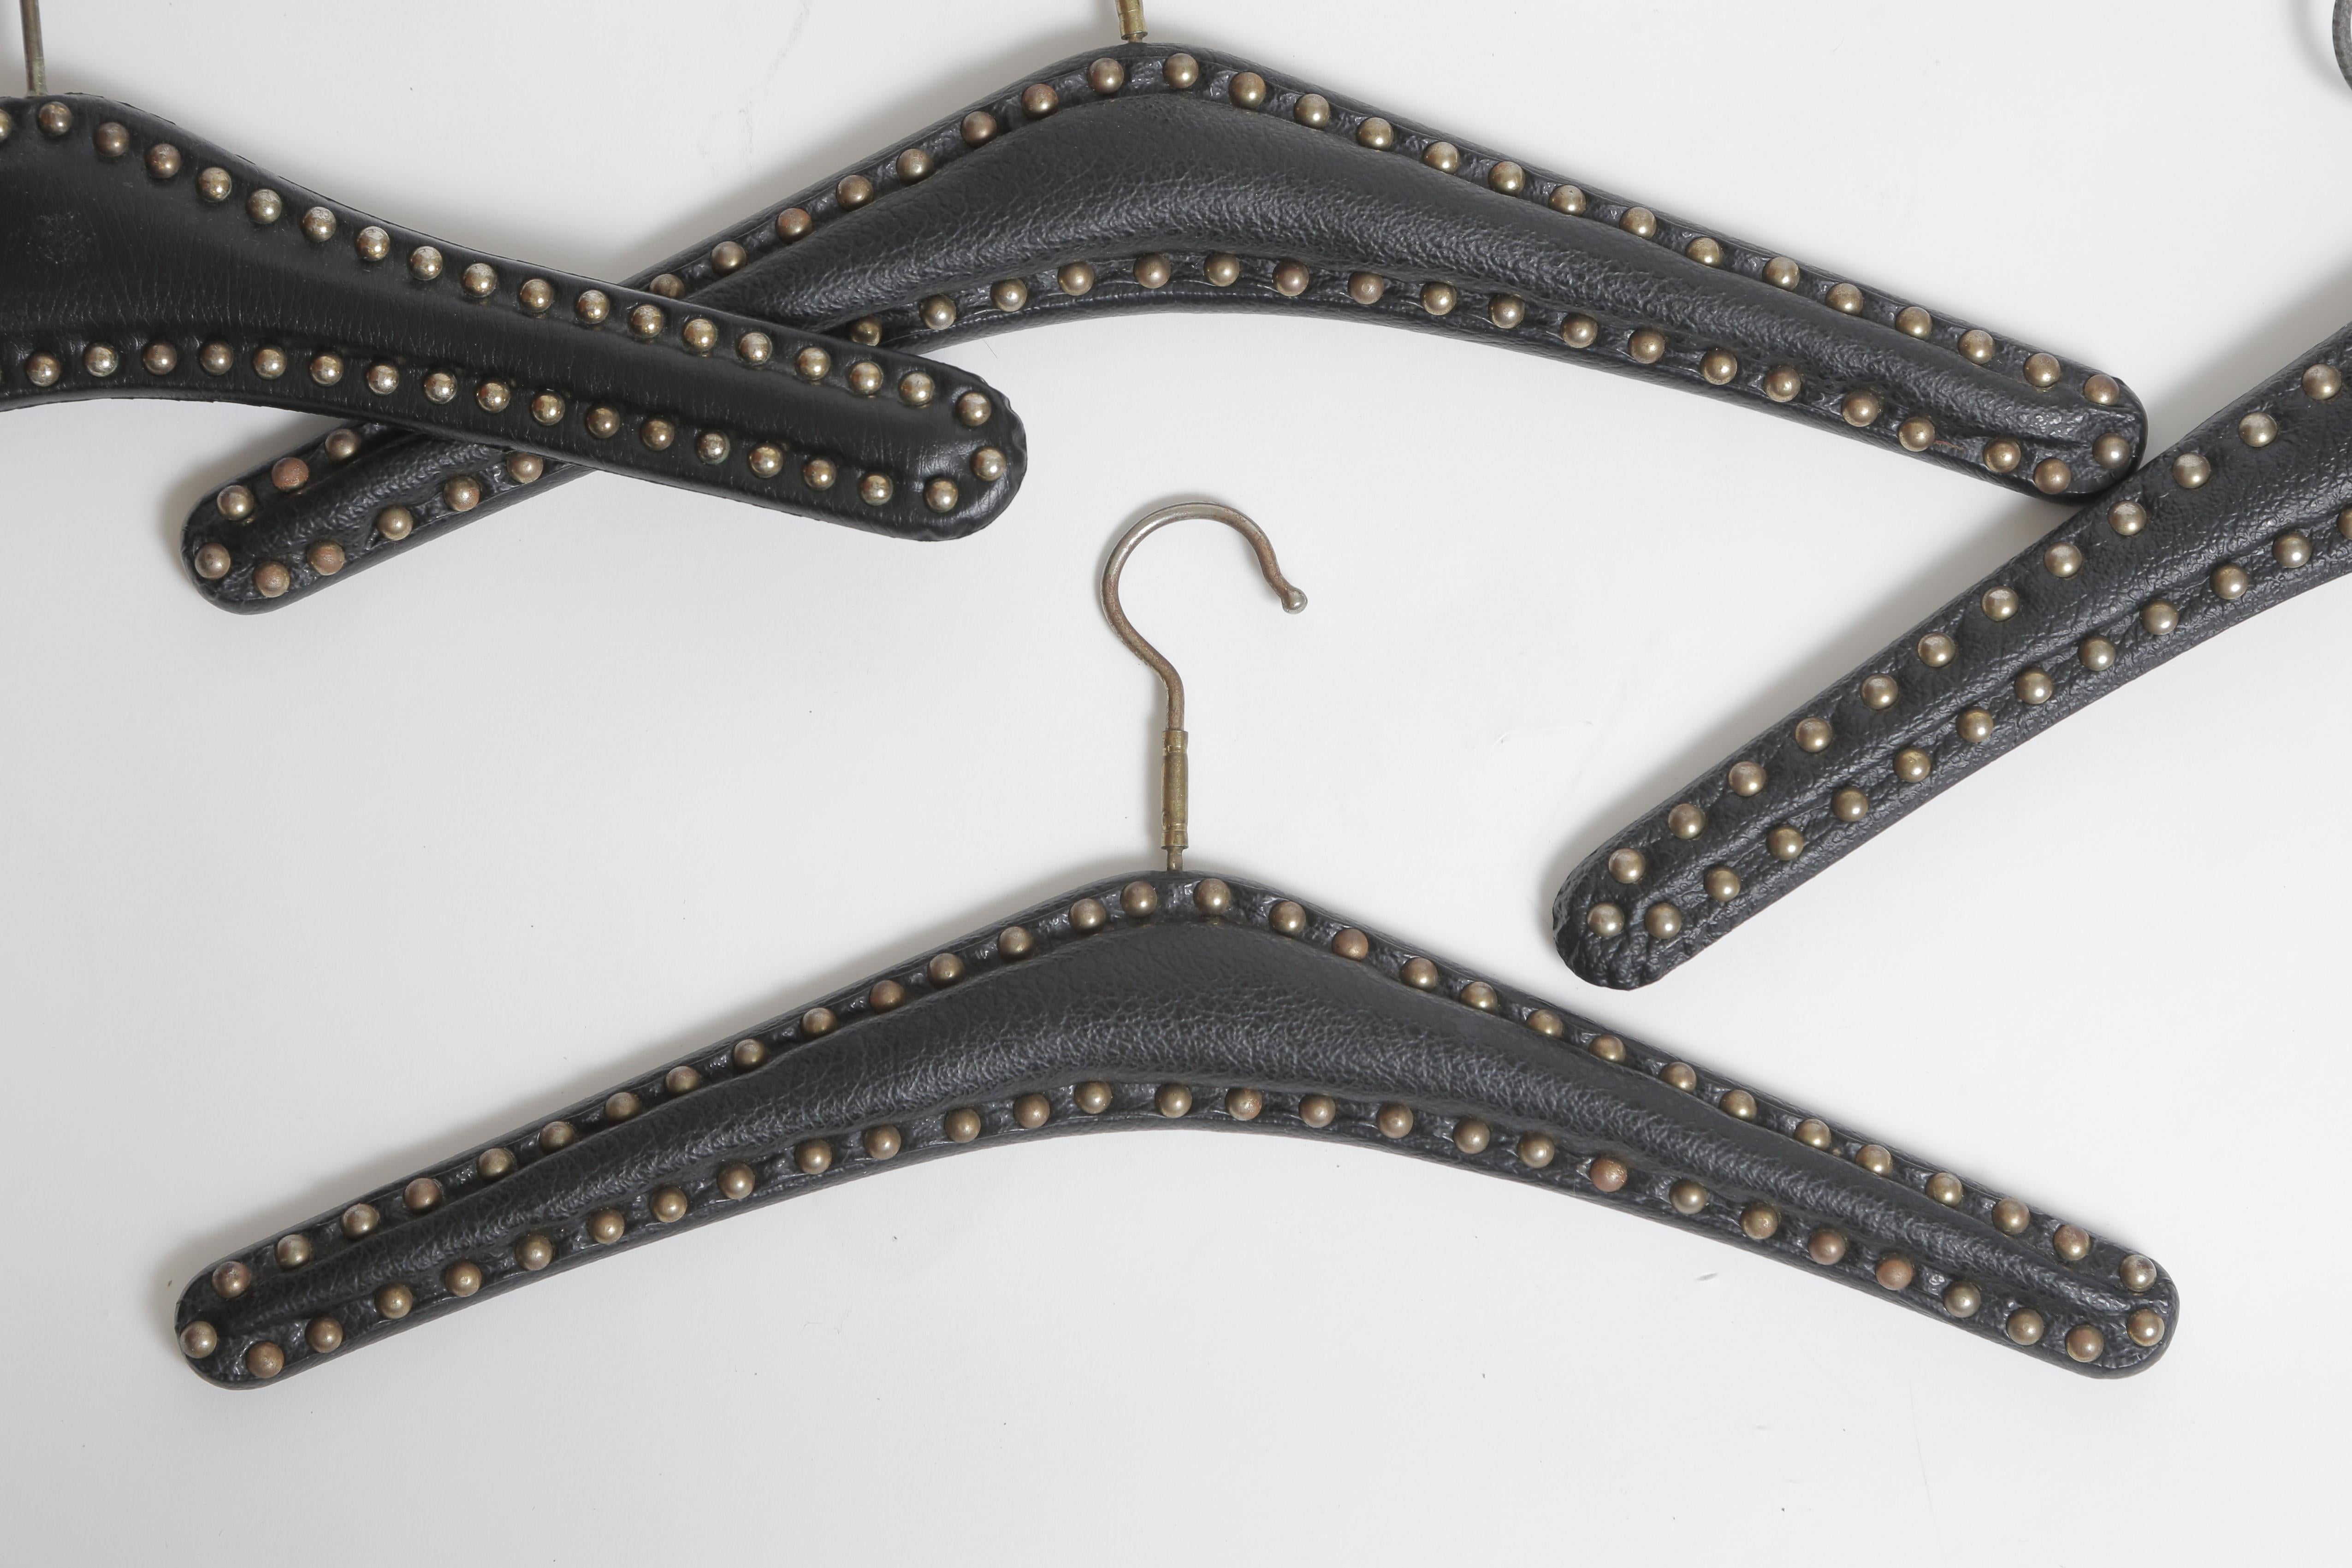 A rare group, consisting of 2 stitched leather wall brackets with 4 looped coat hooks and 5 studded hangers.
Original leather and surface.
Measures: Hangers 16 1/2